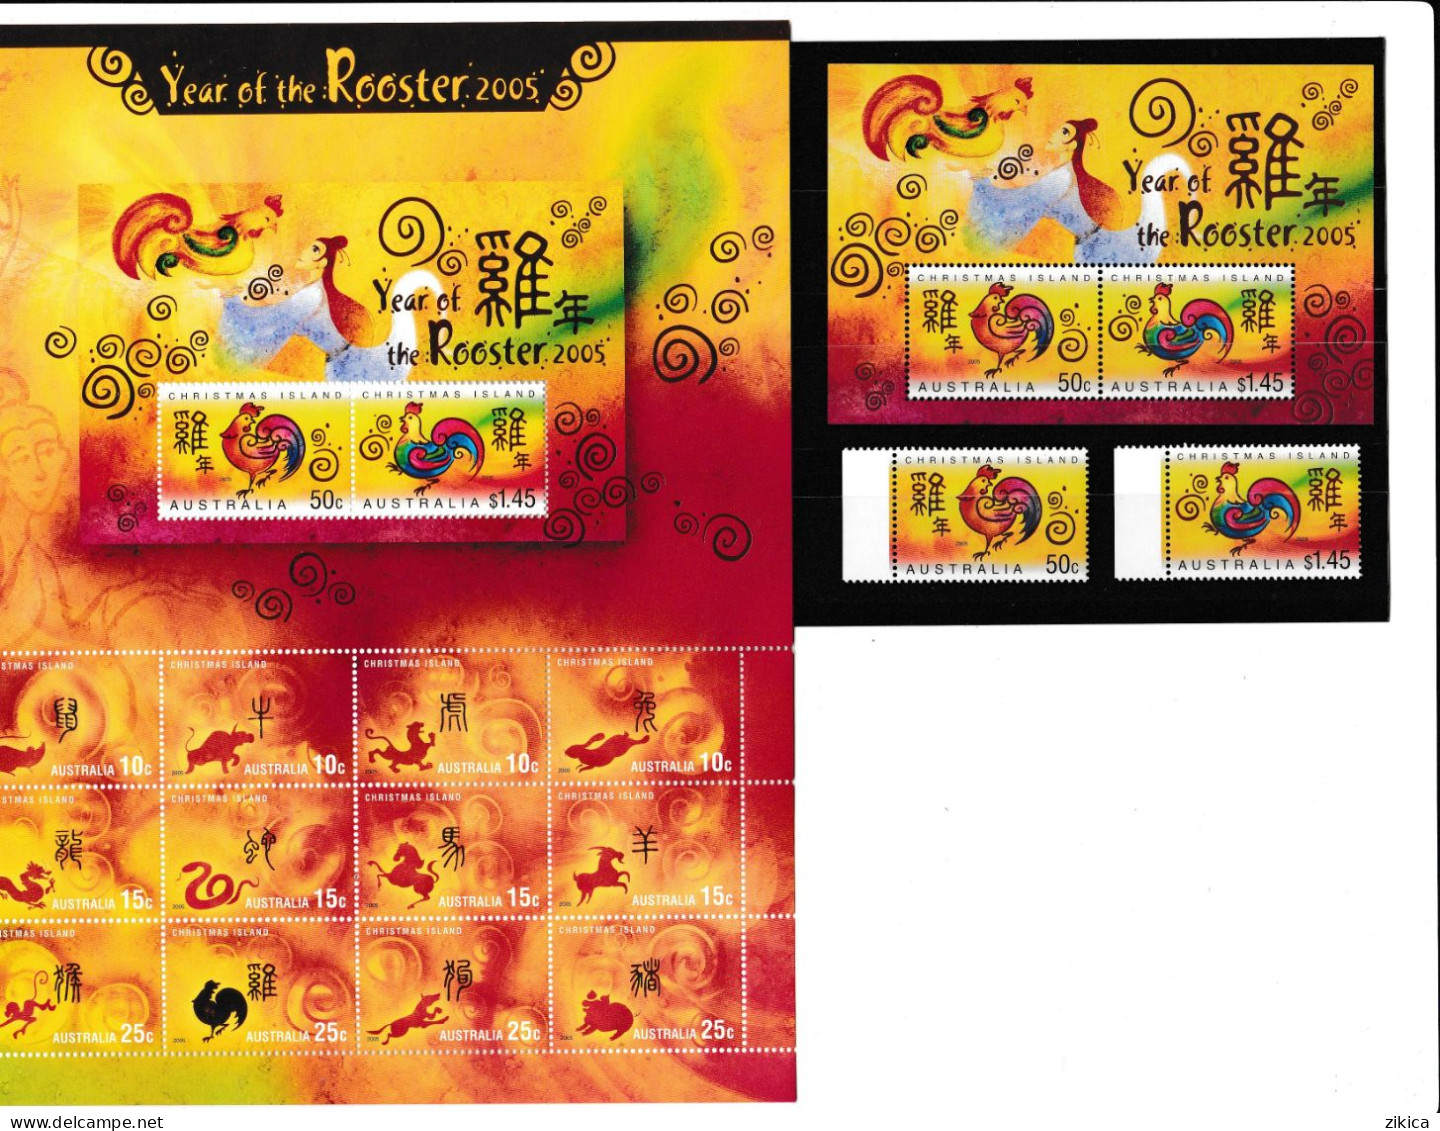 Christmas Island - 2005 Lunar New Year Of The Rooster. Zodiac Astrology Celebrations.animals.2 S/S & Stamps. MNH.** - Christmas Island